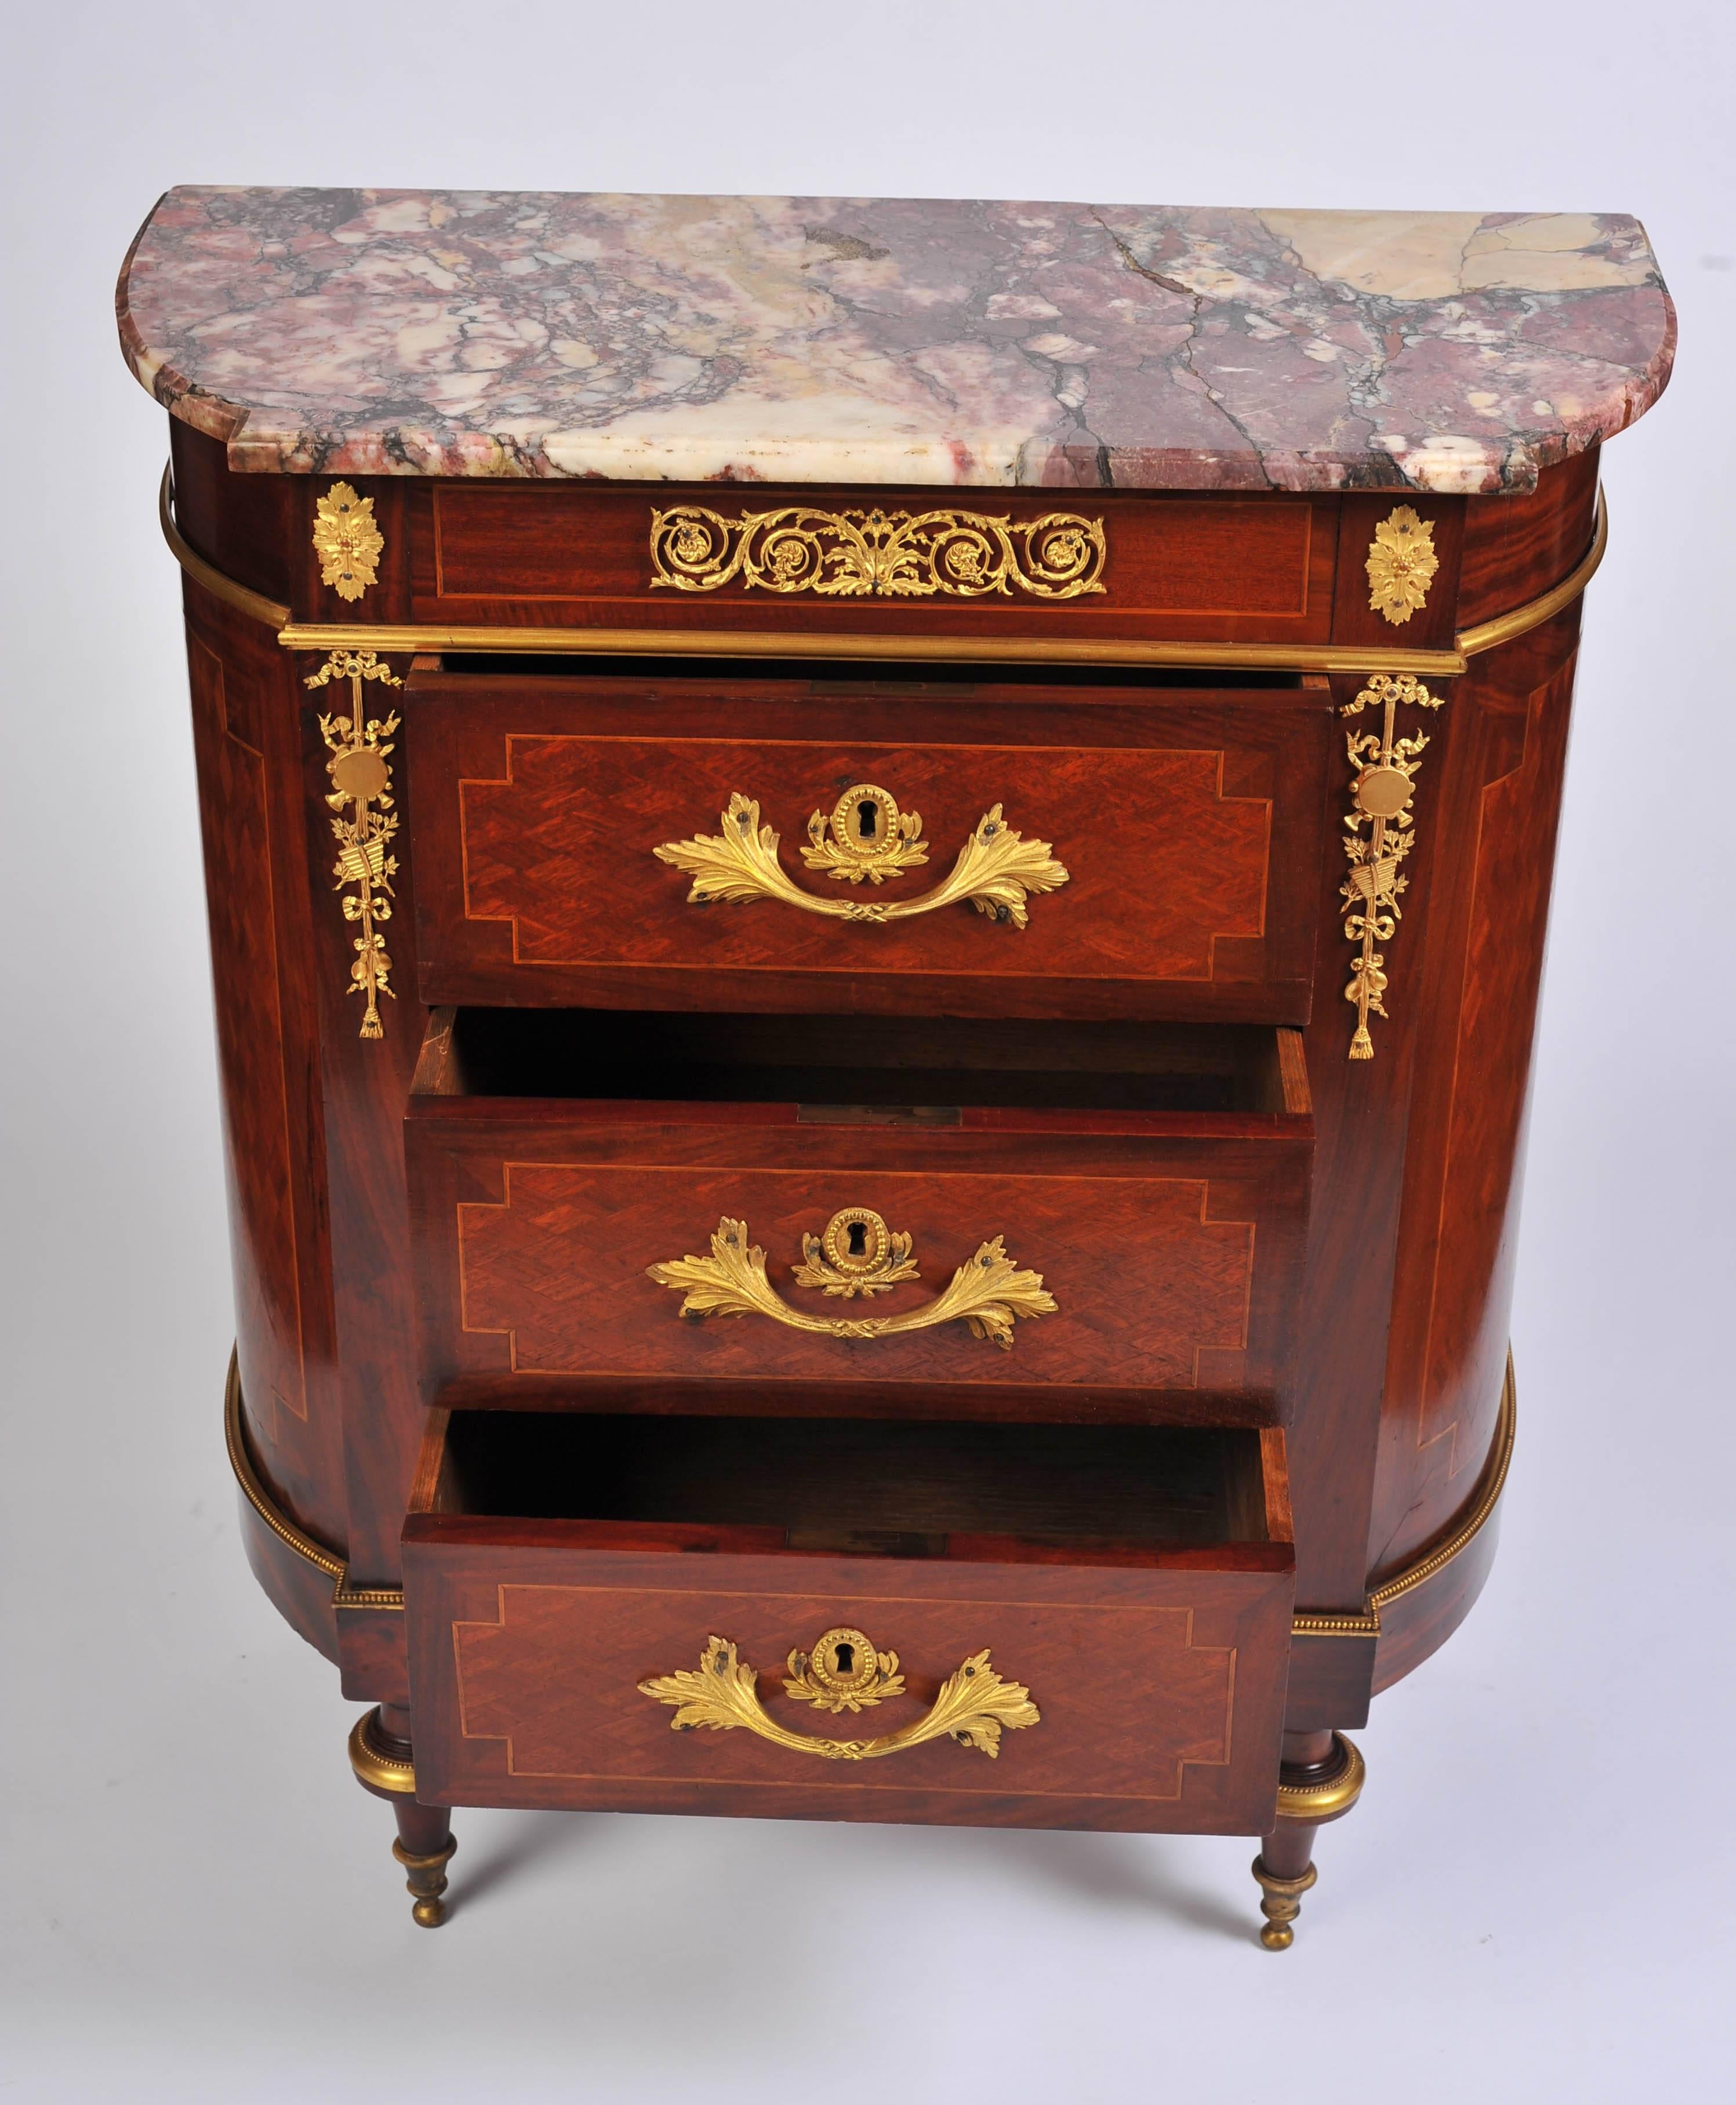 Ormolu Late 19th Century Small Mahogany and Kingwood Commode in the Louis XVI Style